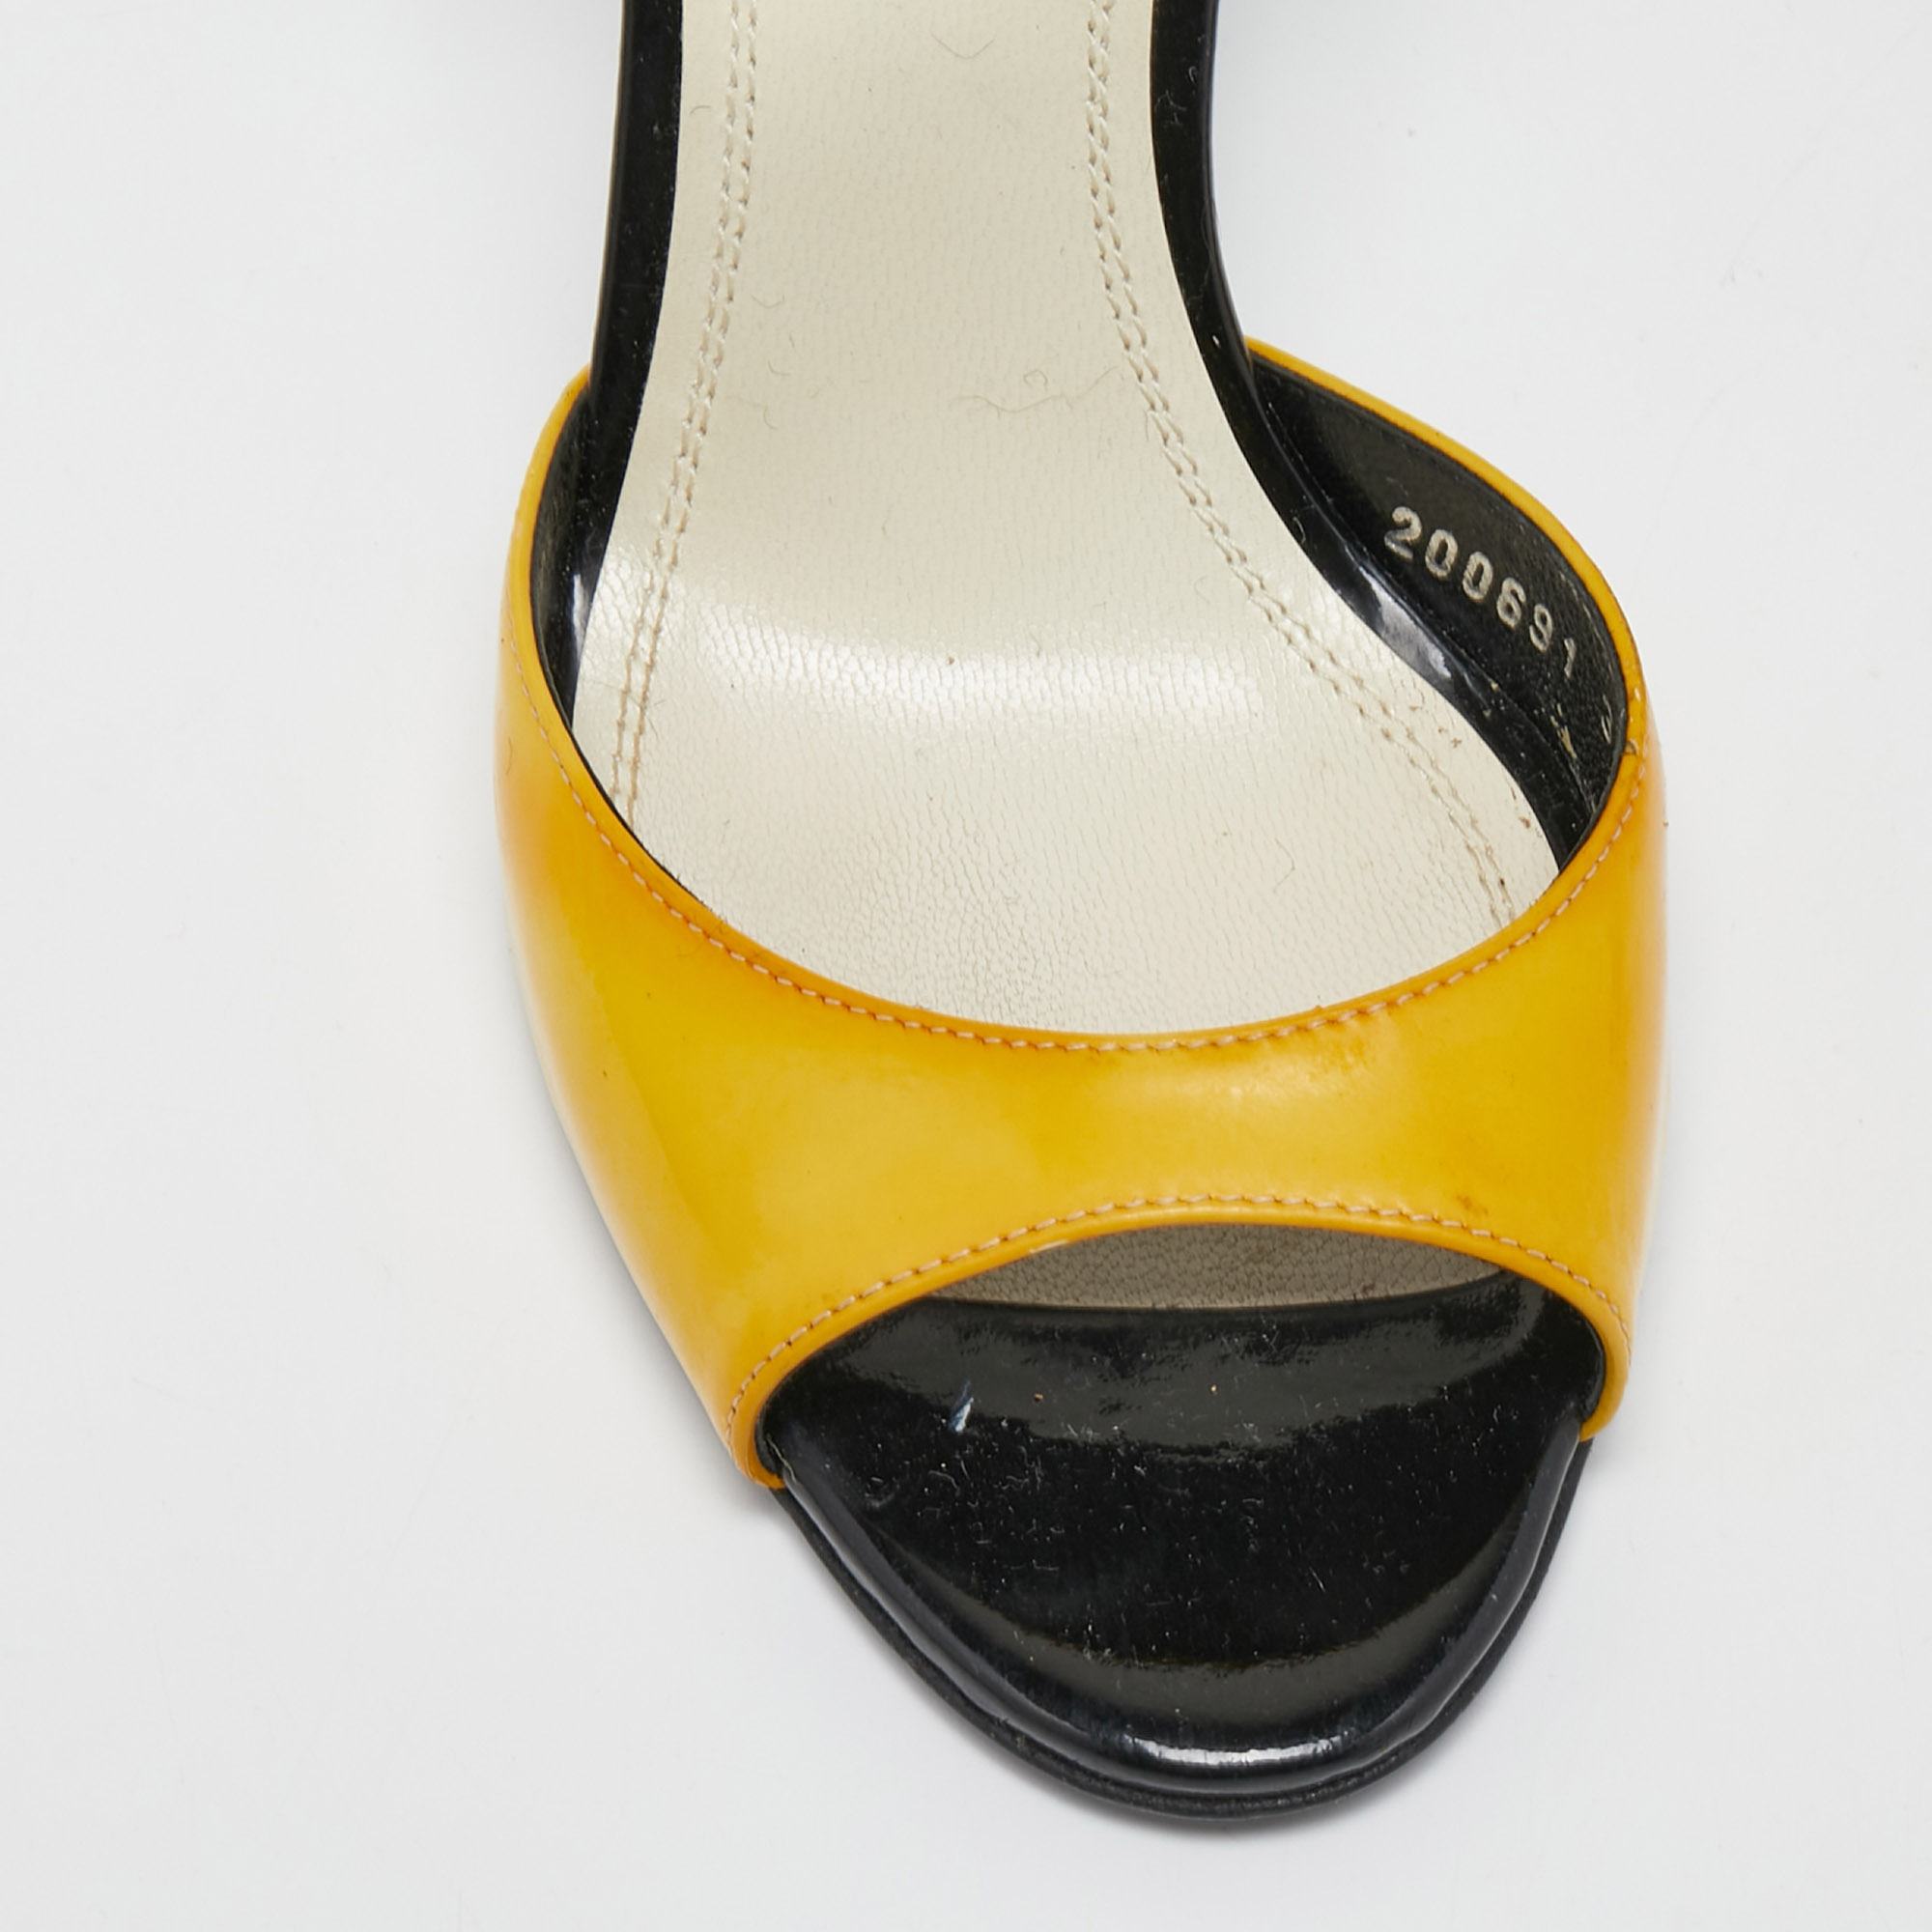 Ralph Lauren Collection Black/Yellow Patent Leather Ankle Strap Sandals Size 36